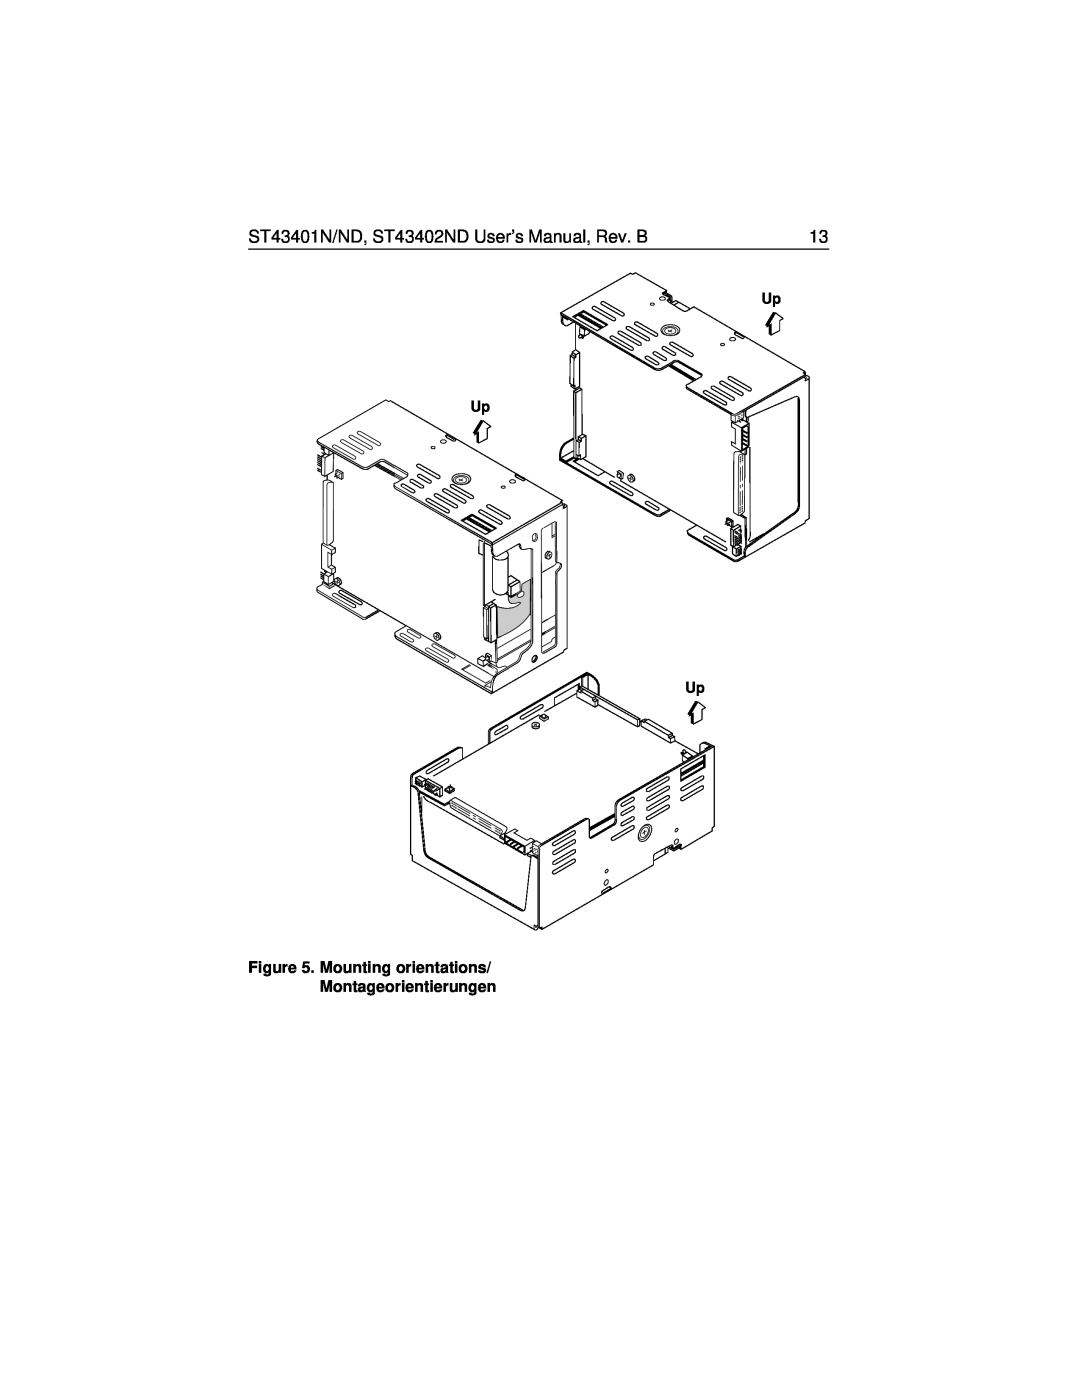 Seagate ST43401N/ND, ST43402ND user manual Mounting orientations Montageorientierungen, Up Up Up 